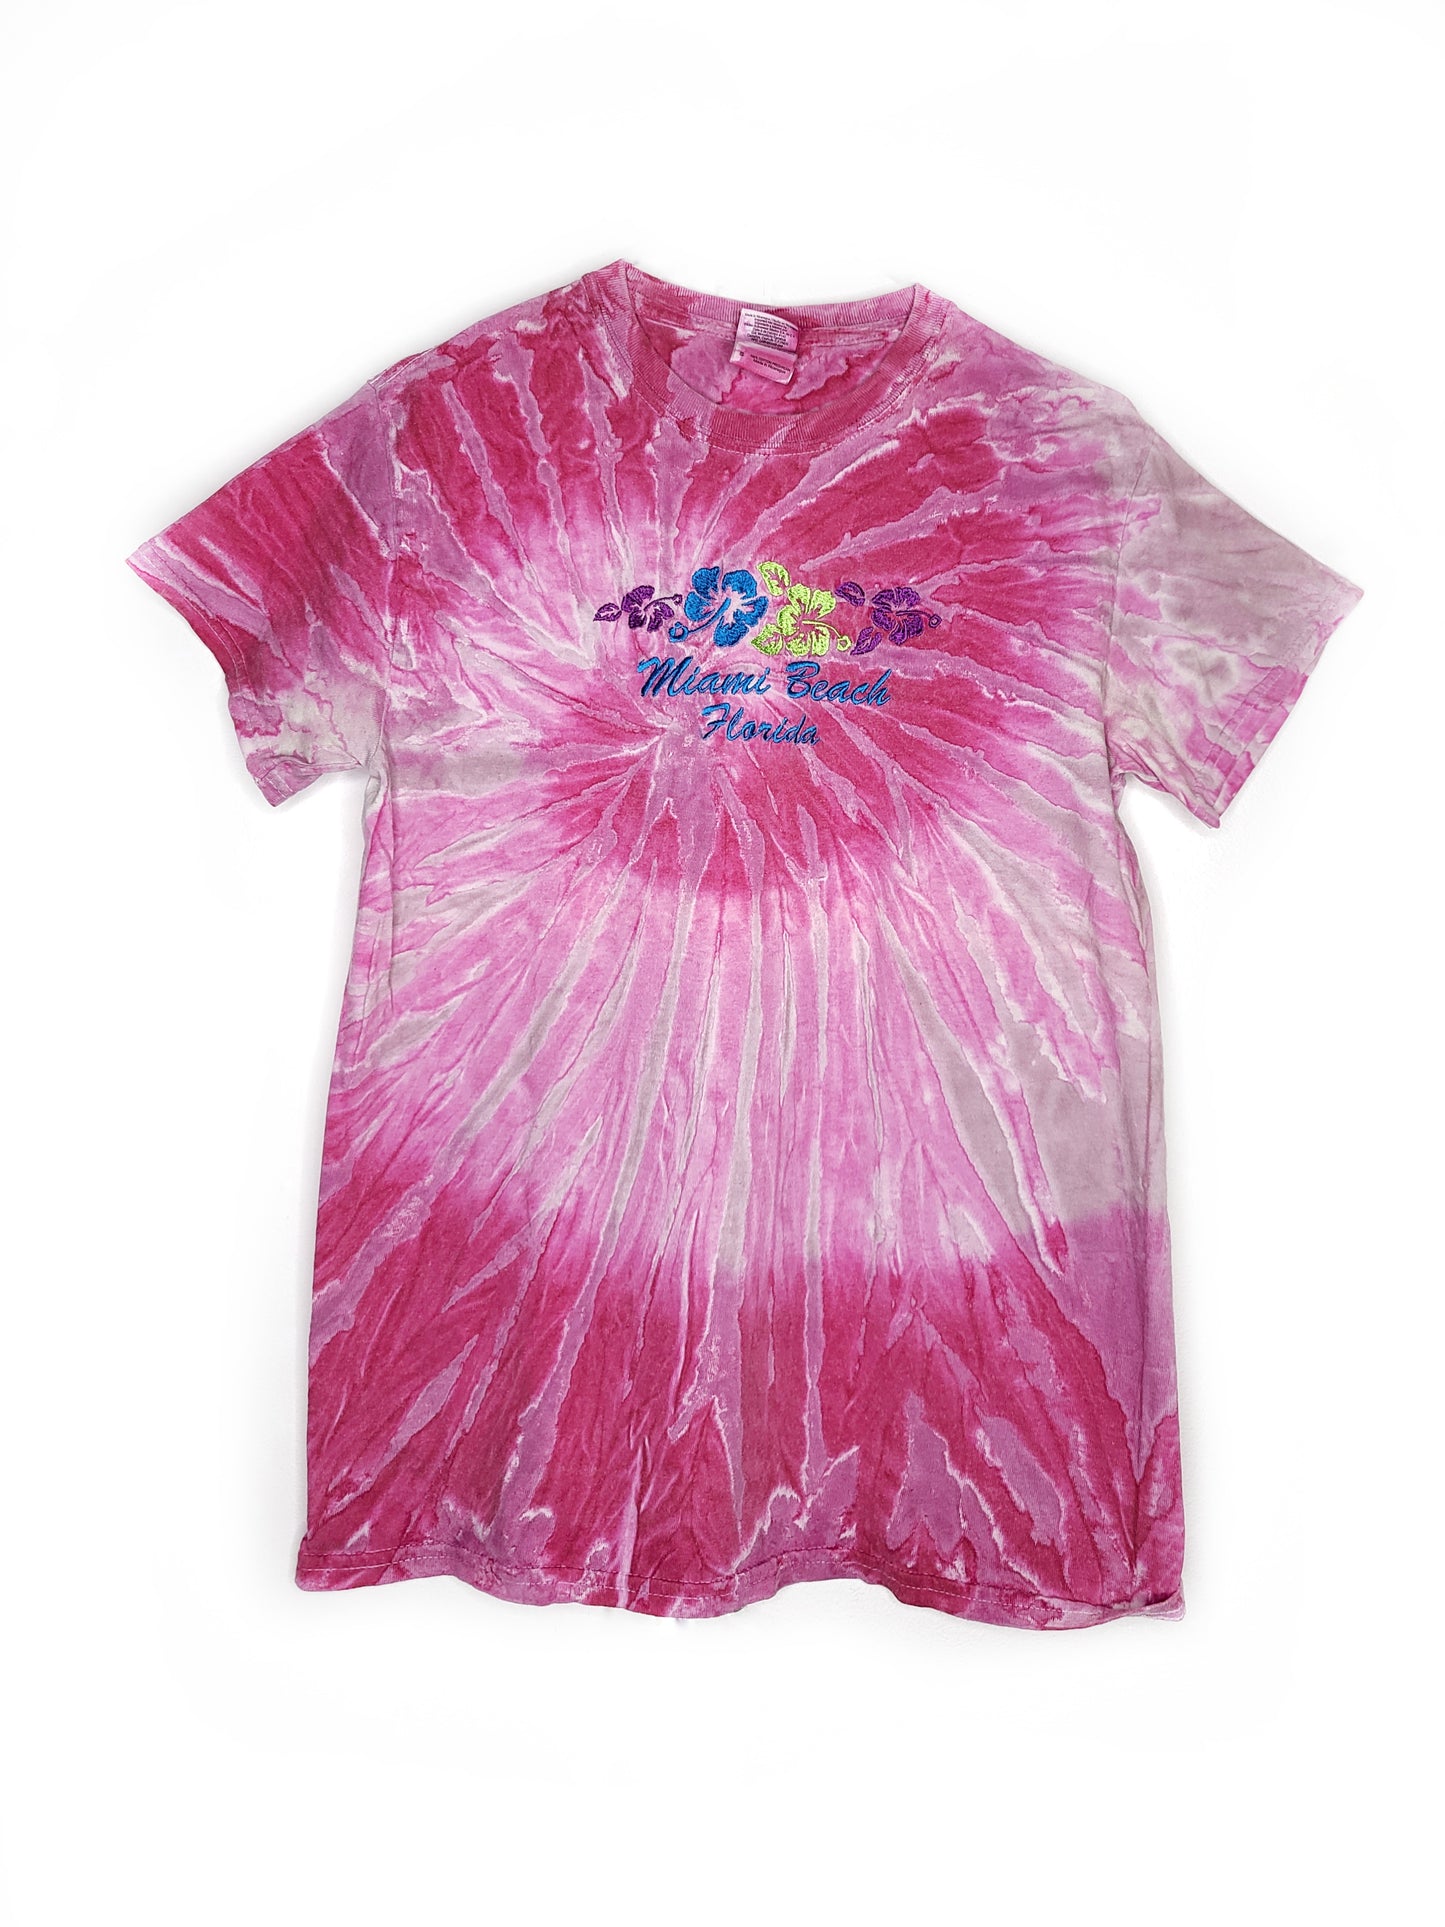 Tshirt tie and dye rose 80s streetwear funky miami beach flocage vintage oversize floride hibiscus psyche